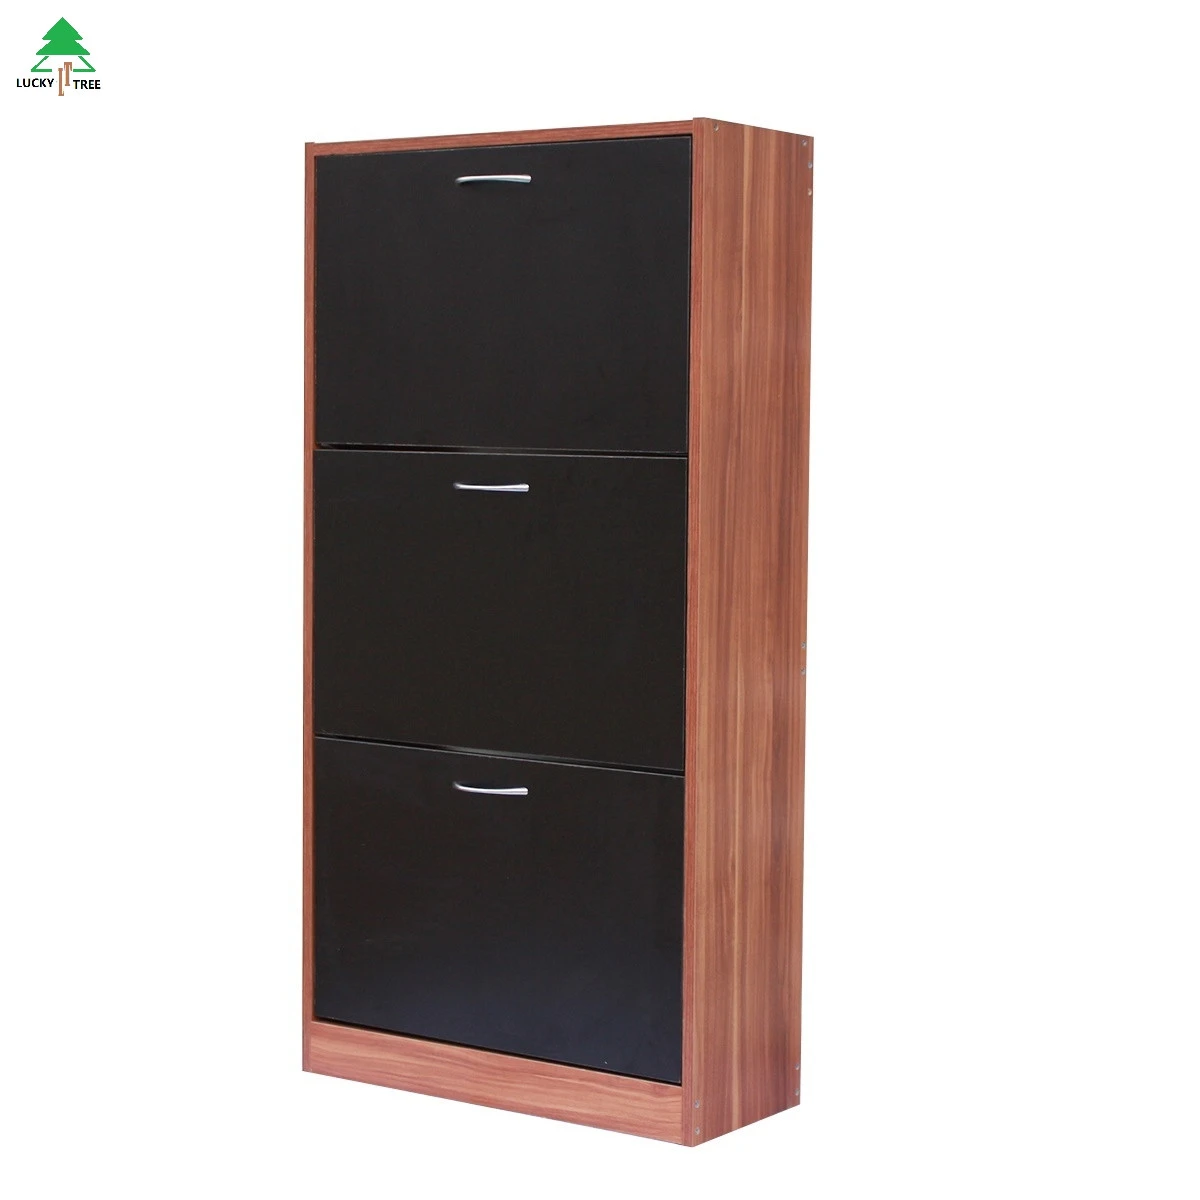 Modern wooden shoe rack storage cabinet with wood legs